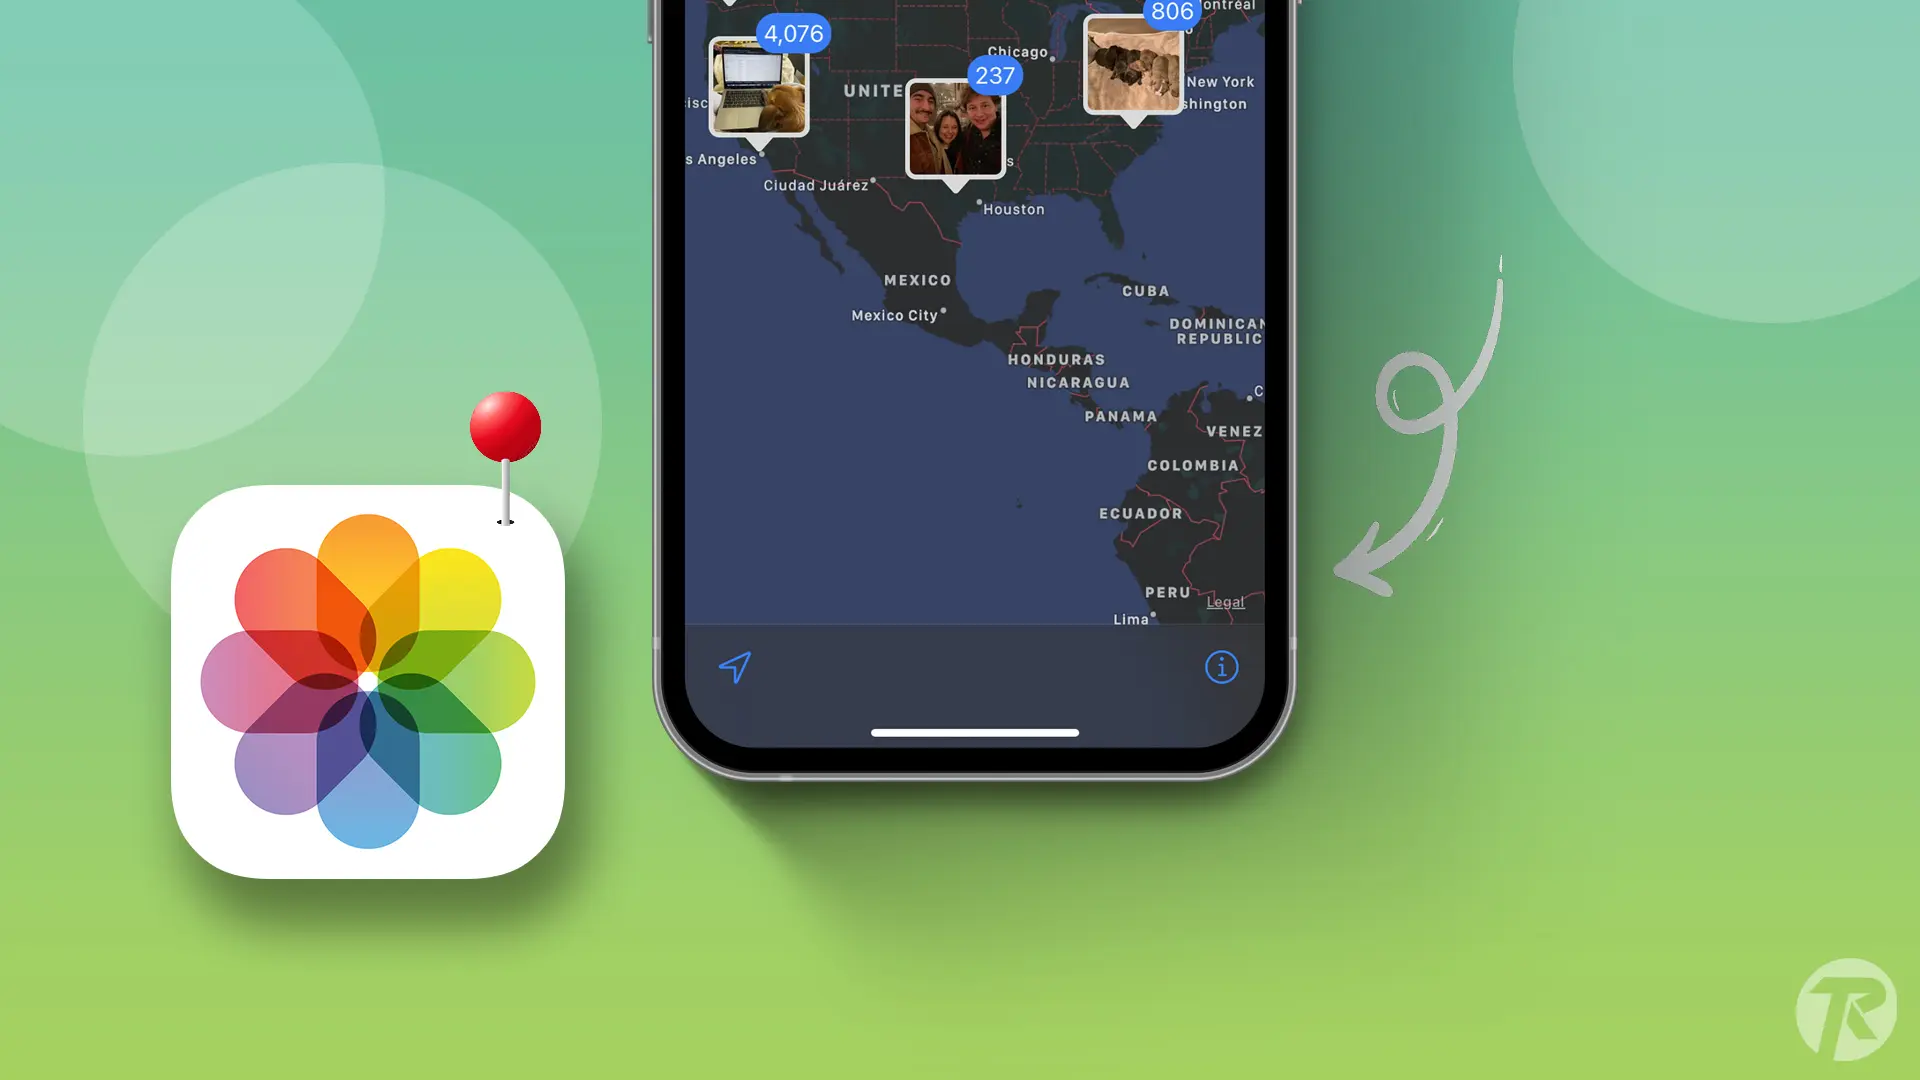 Send Photos Without Location and Caption Data in iMessage